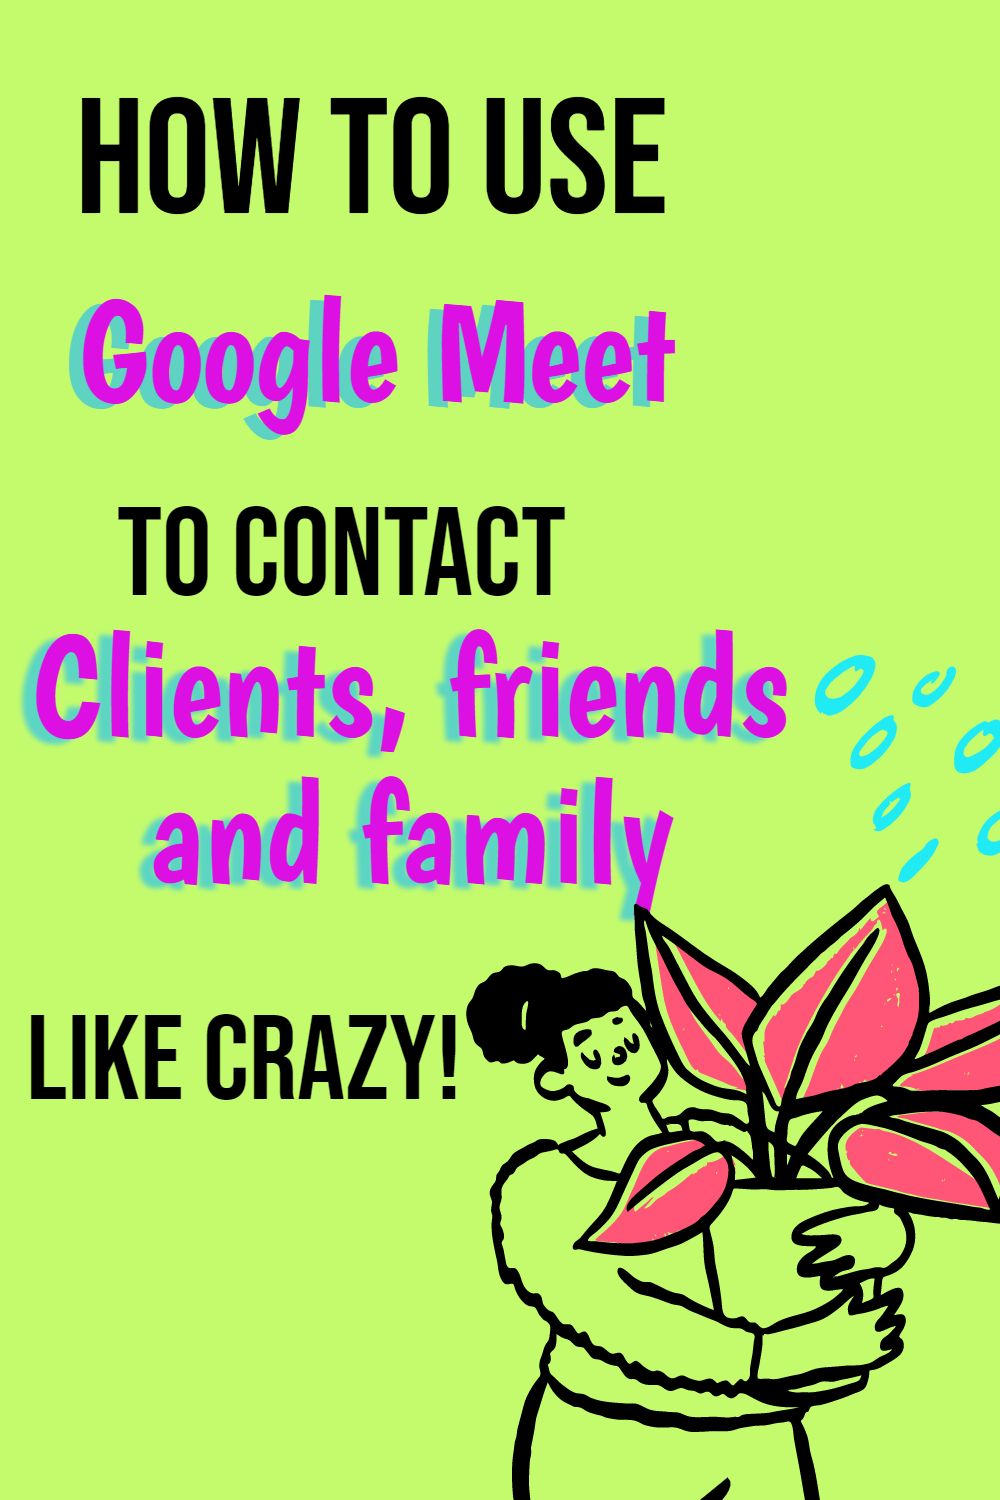 How to Use Google Meet